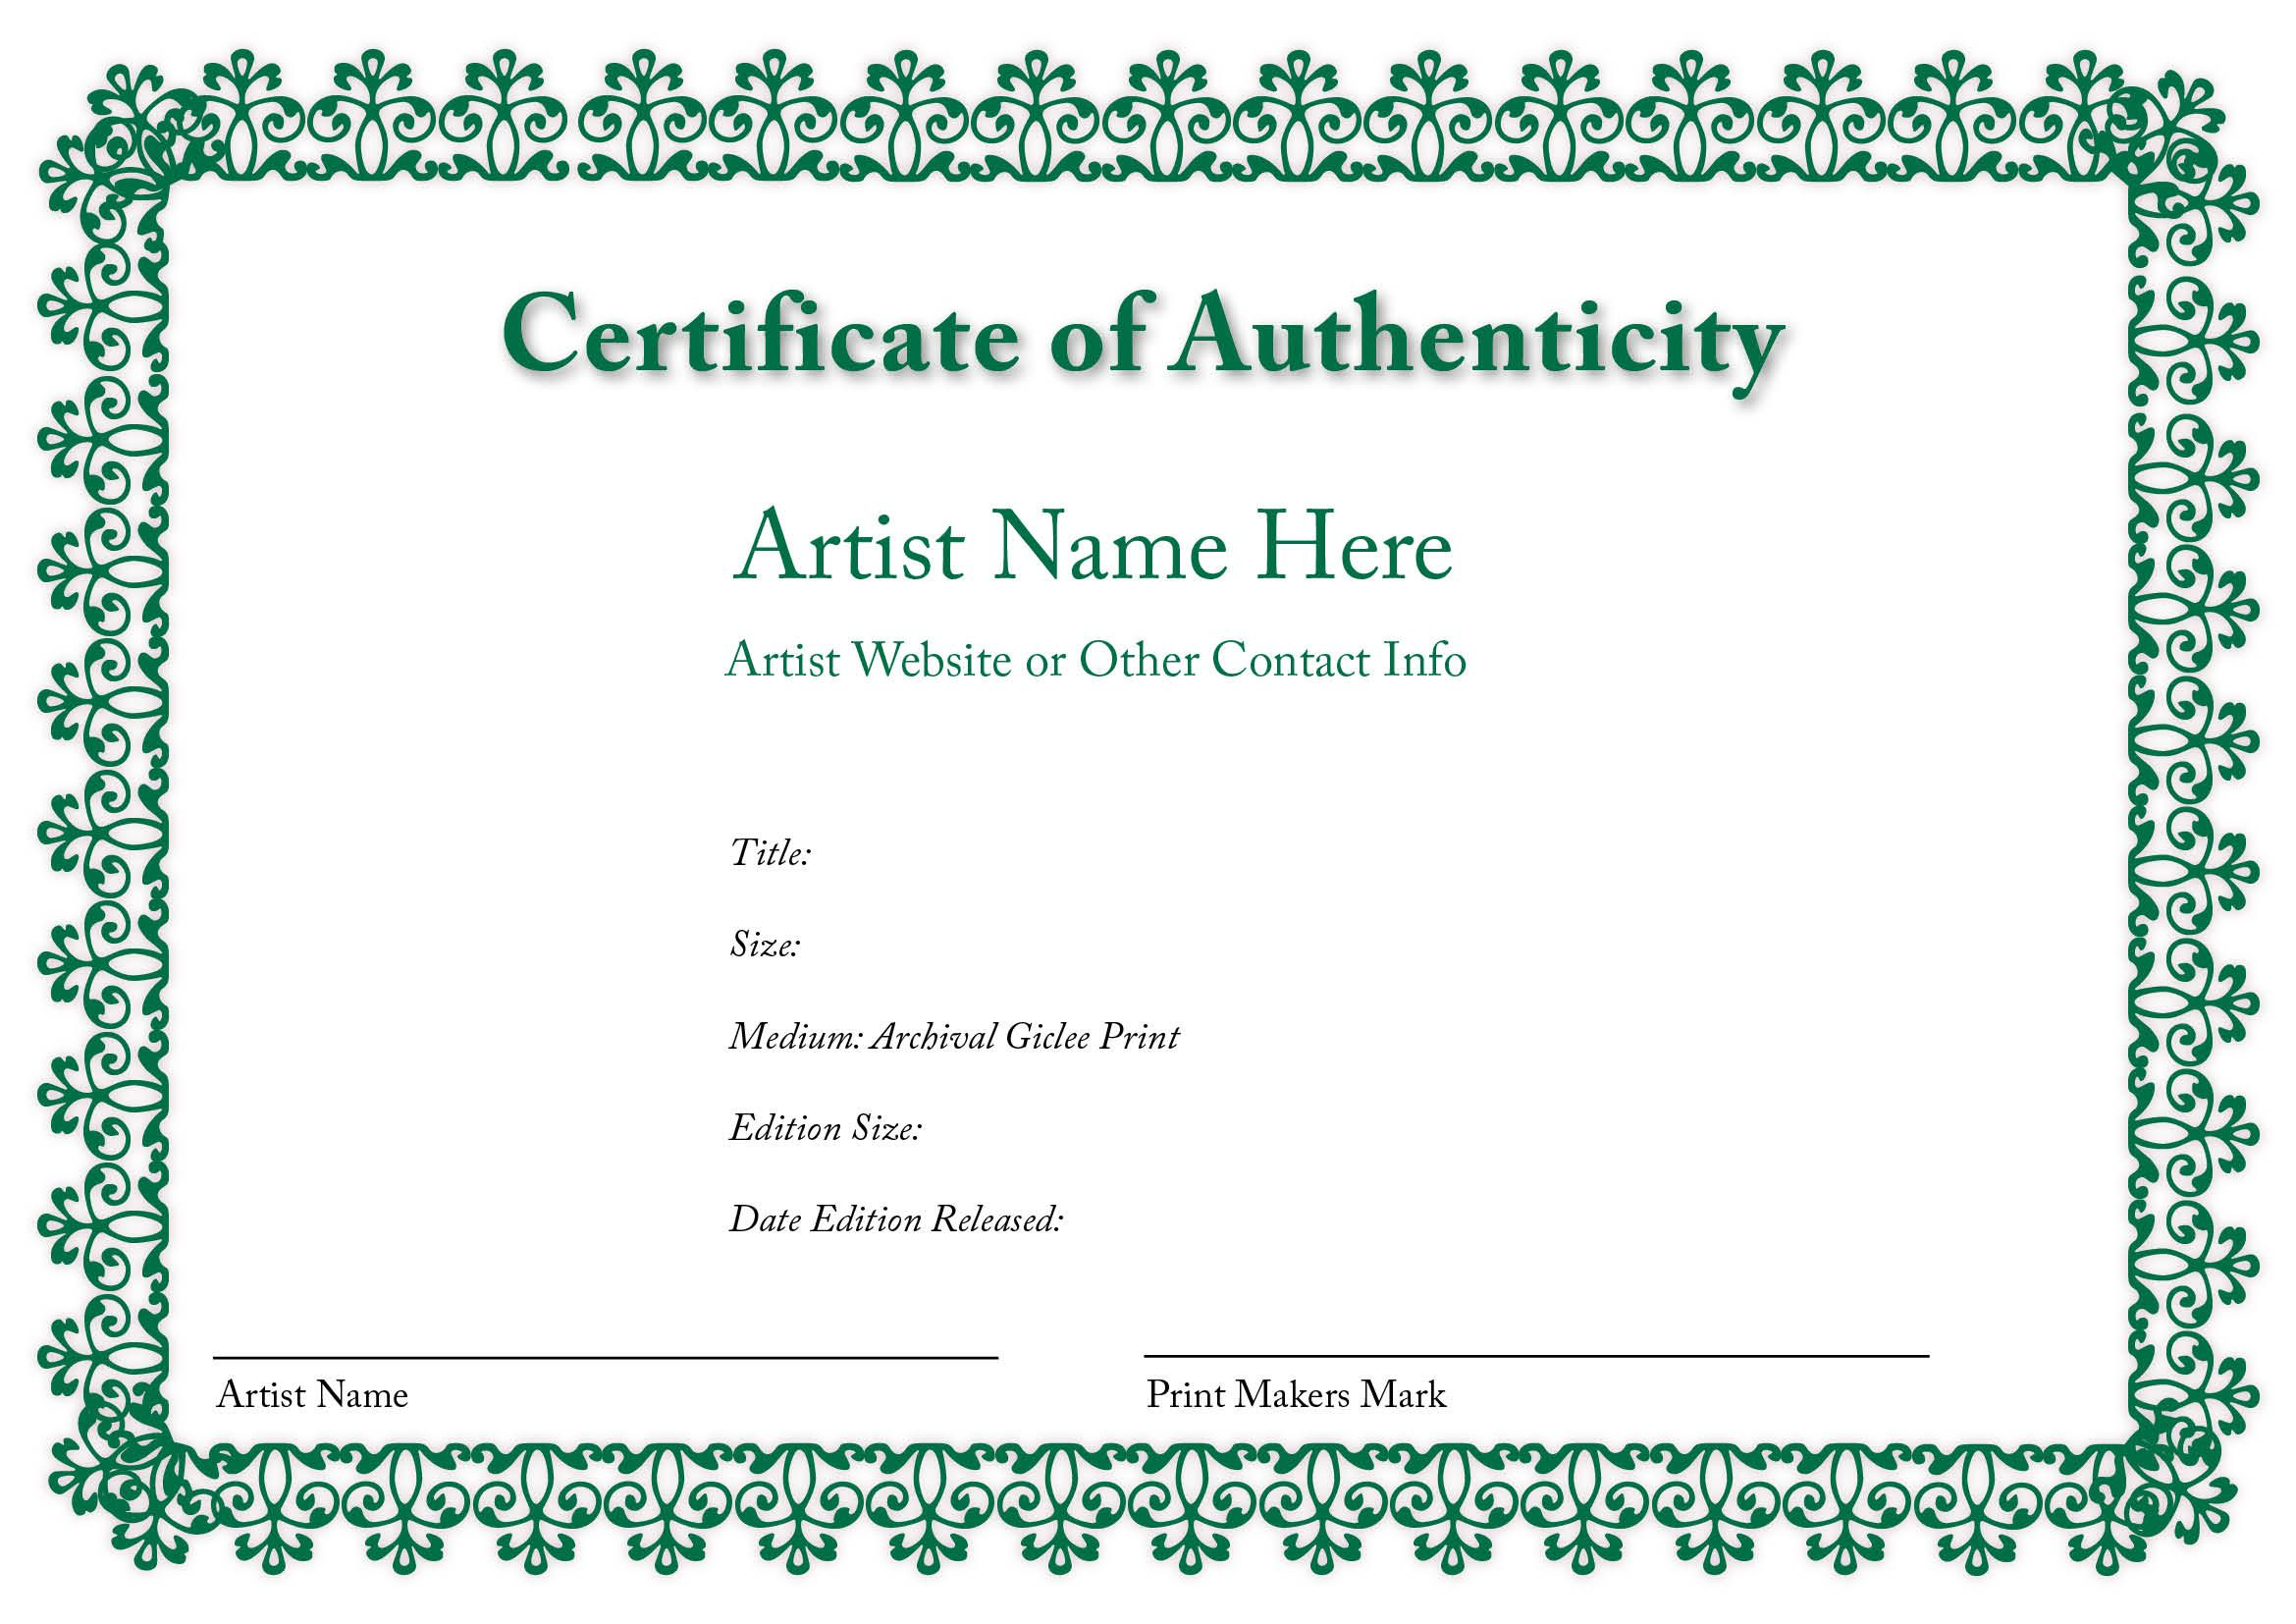 Certificate Of Authenticity Of An Art Print In 2019 Pertaining To Certificate Of Authenticity Photography Template